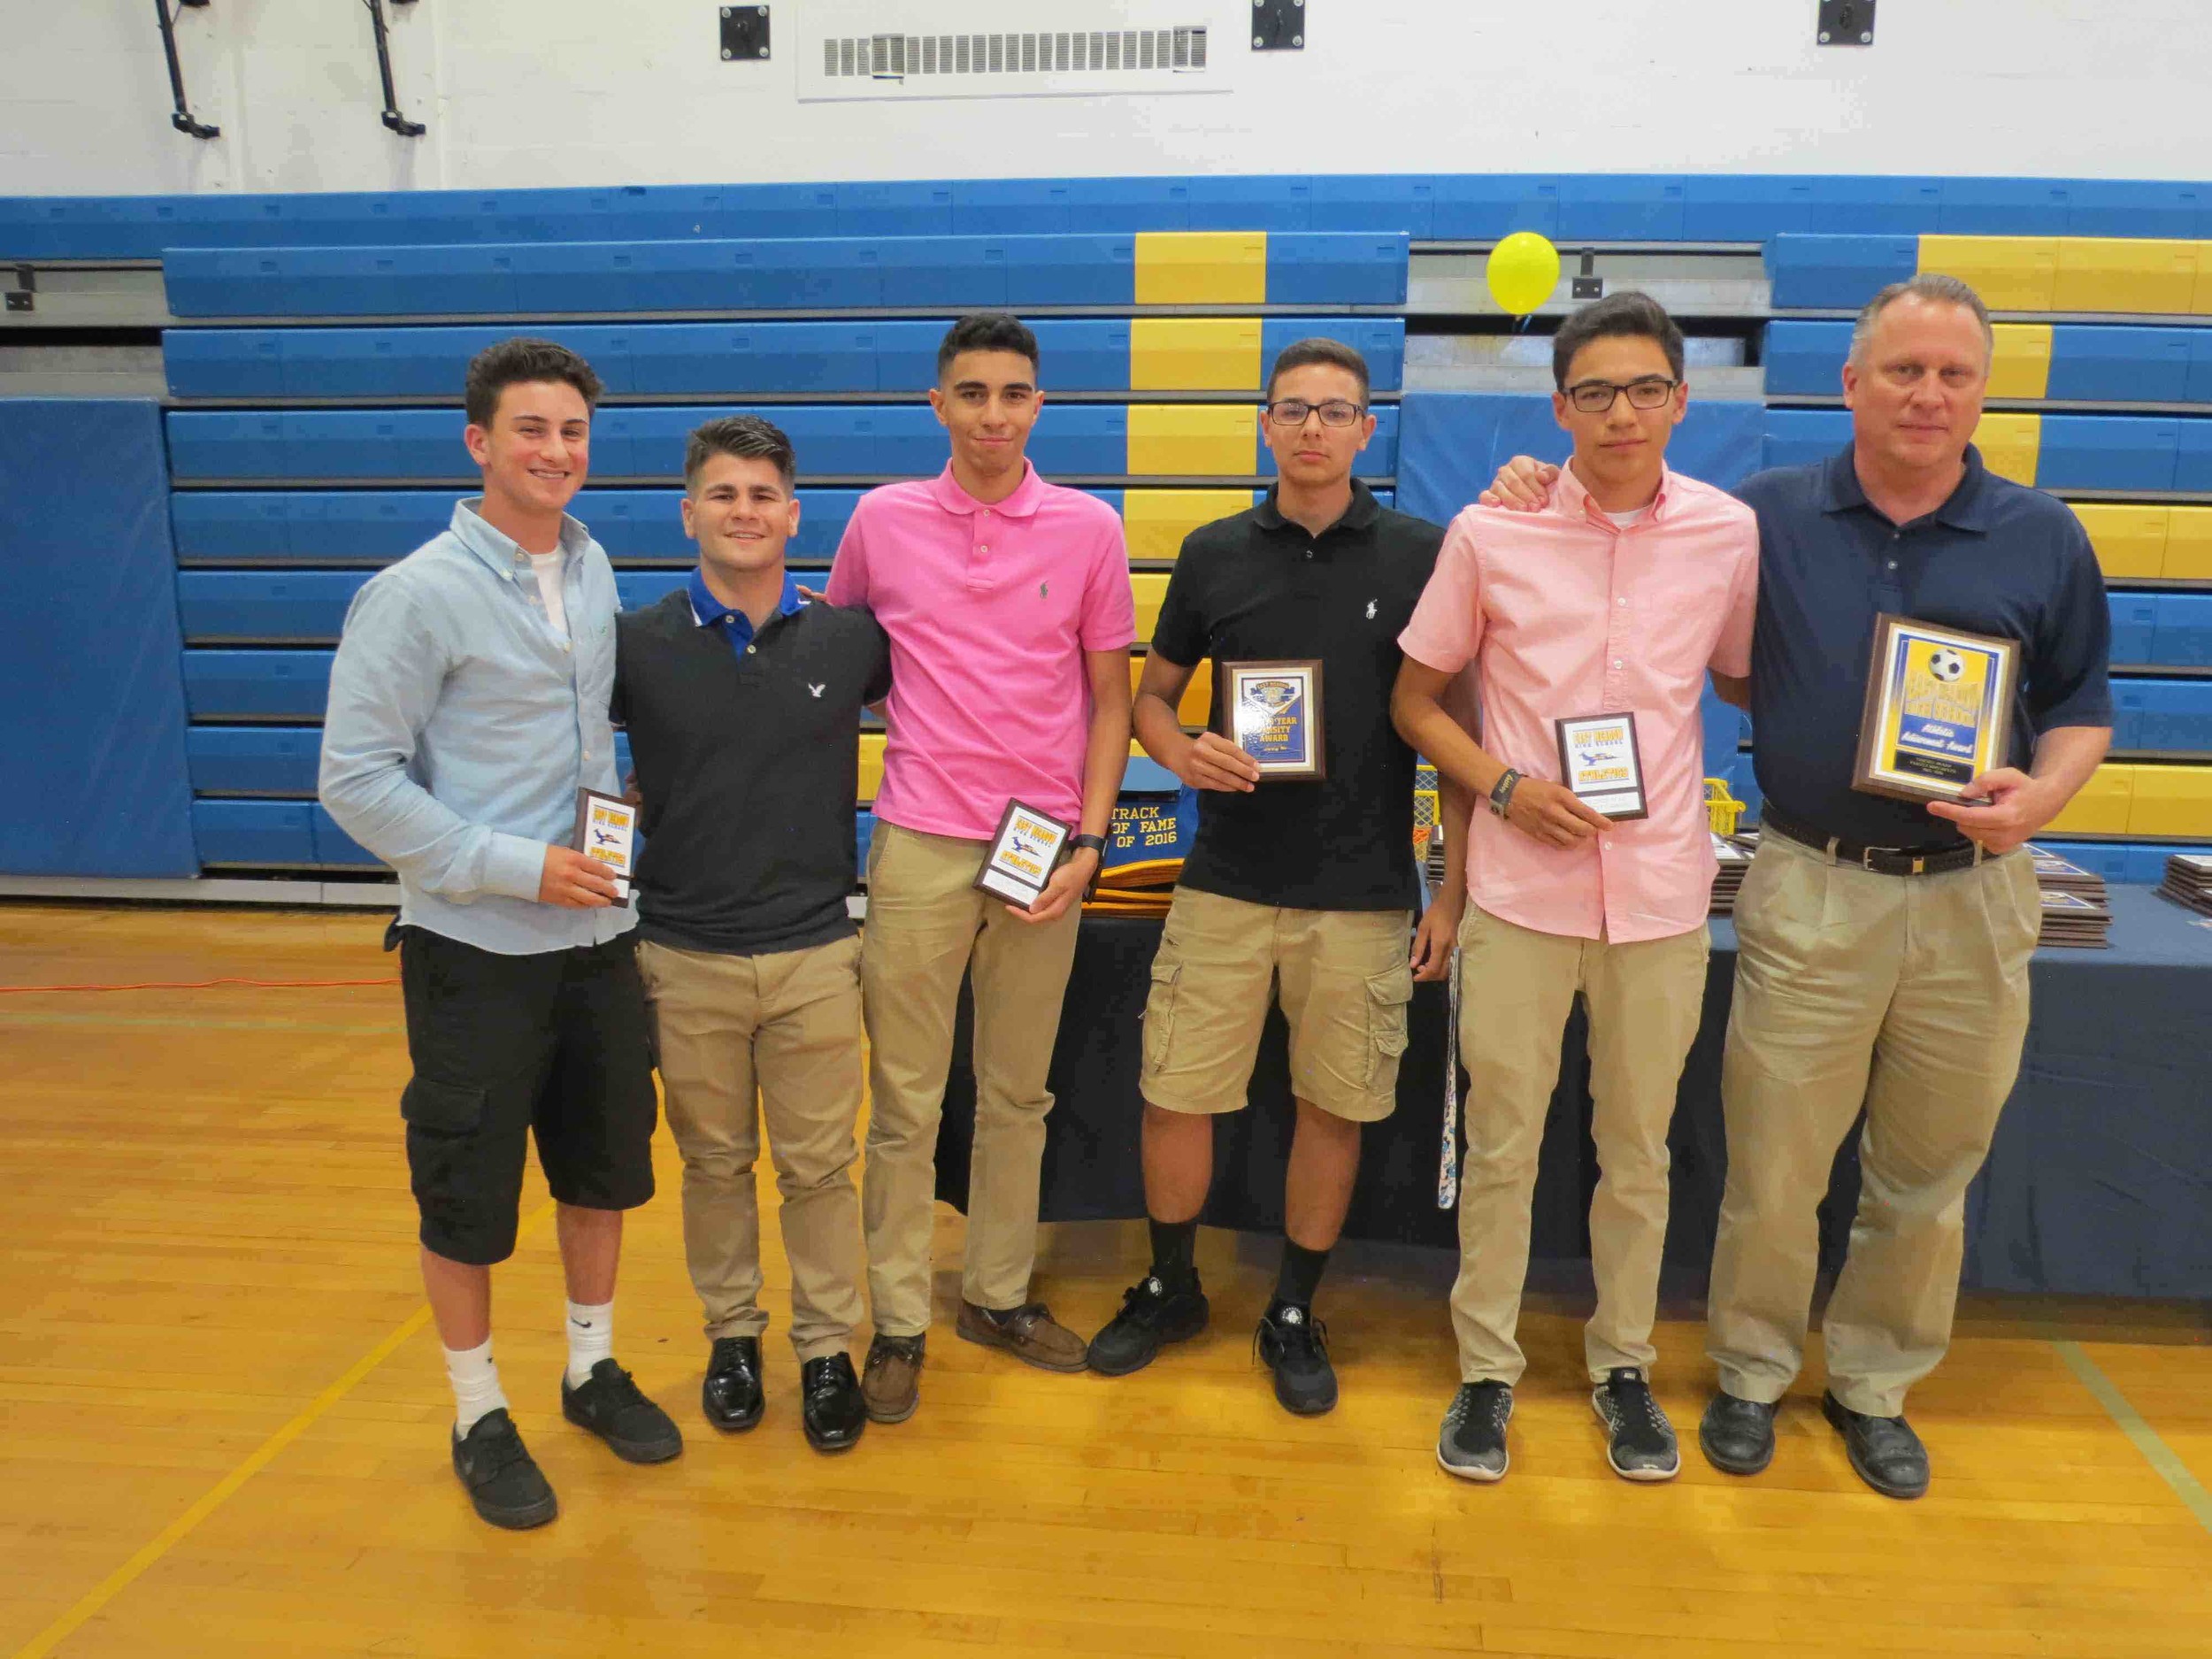 Several East Meadow High School soccer players were honored at the annual senior athletic awards ceremony.